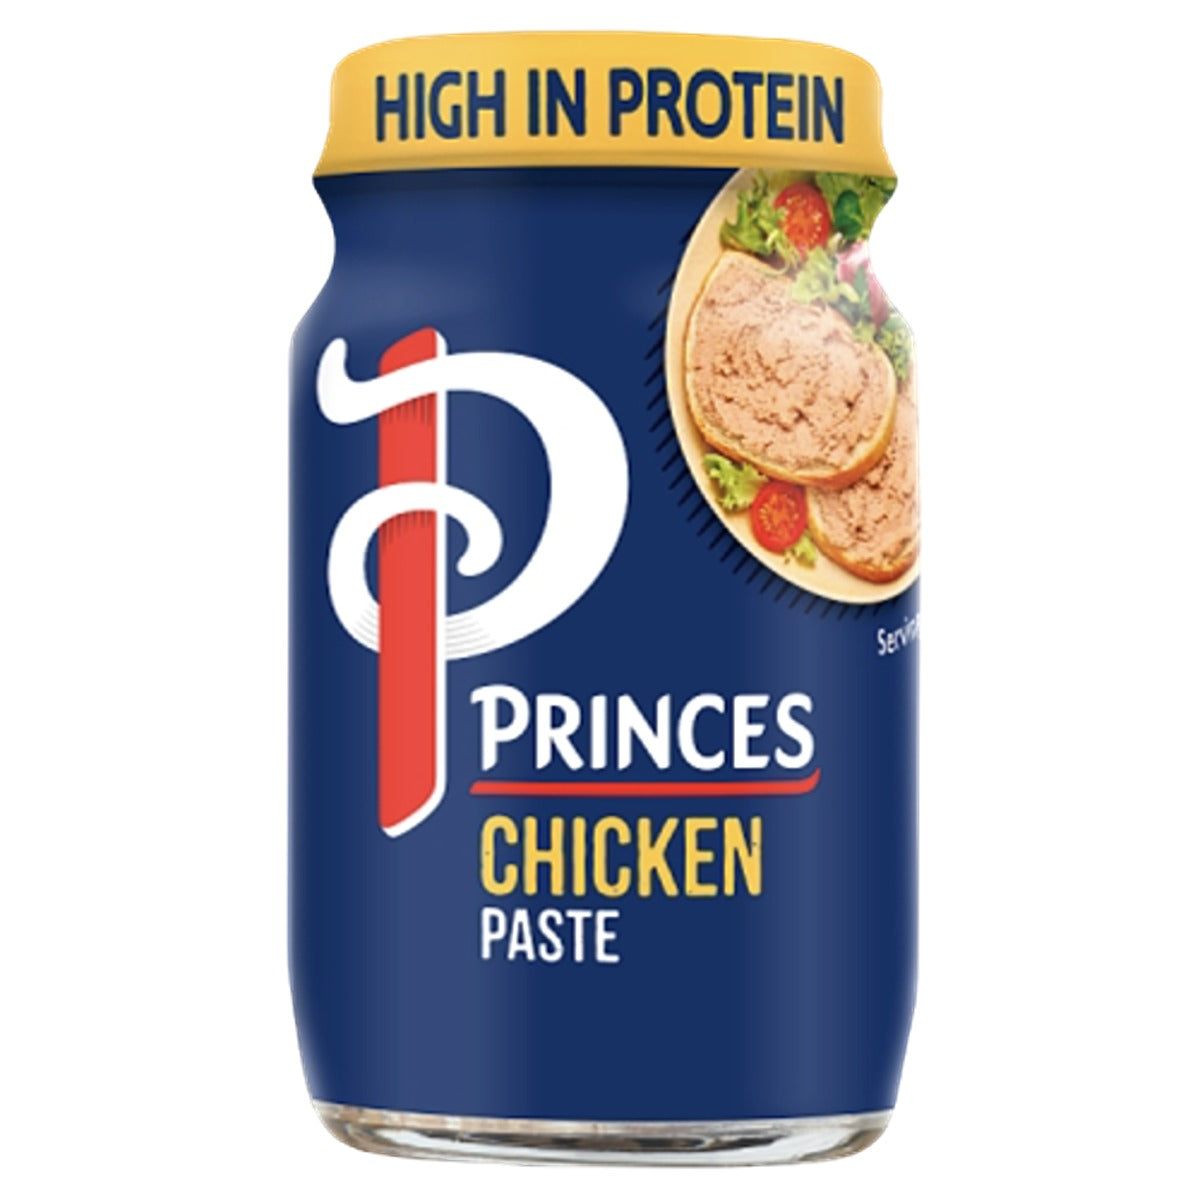 Princes - Chicken Paste - 75g - Continental Food Store